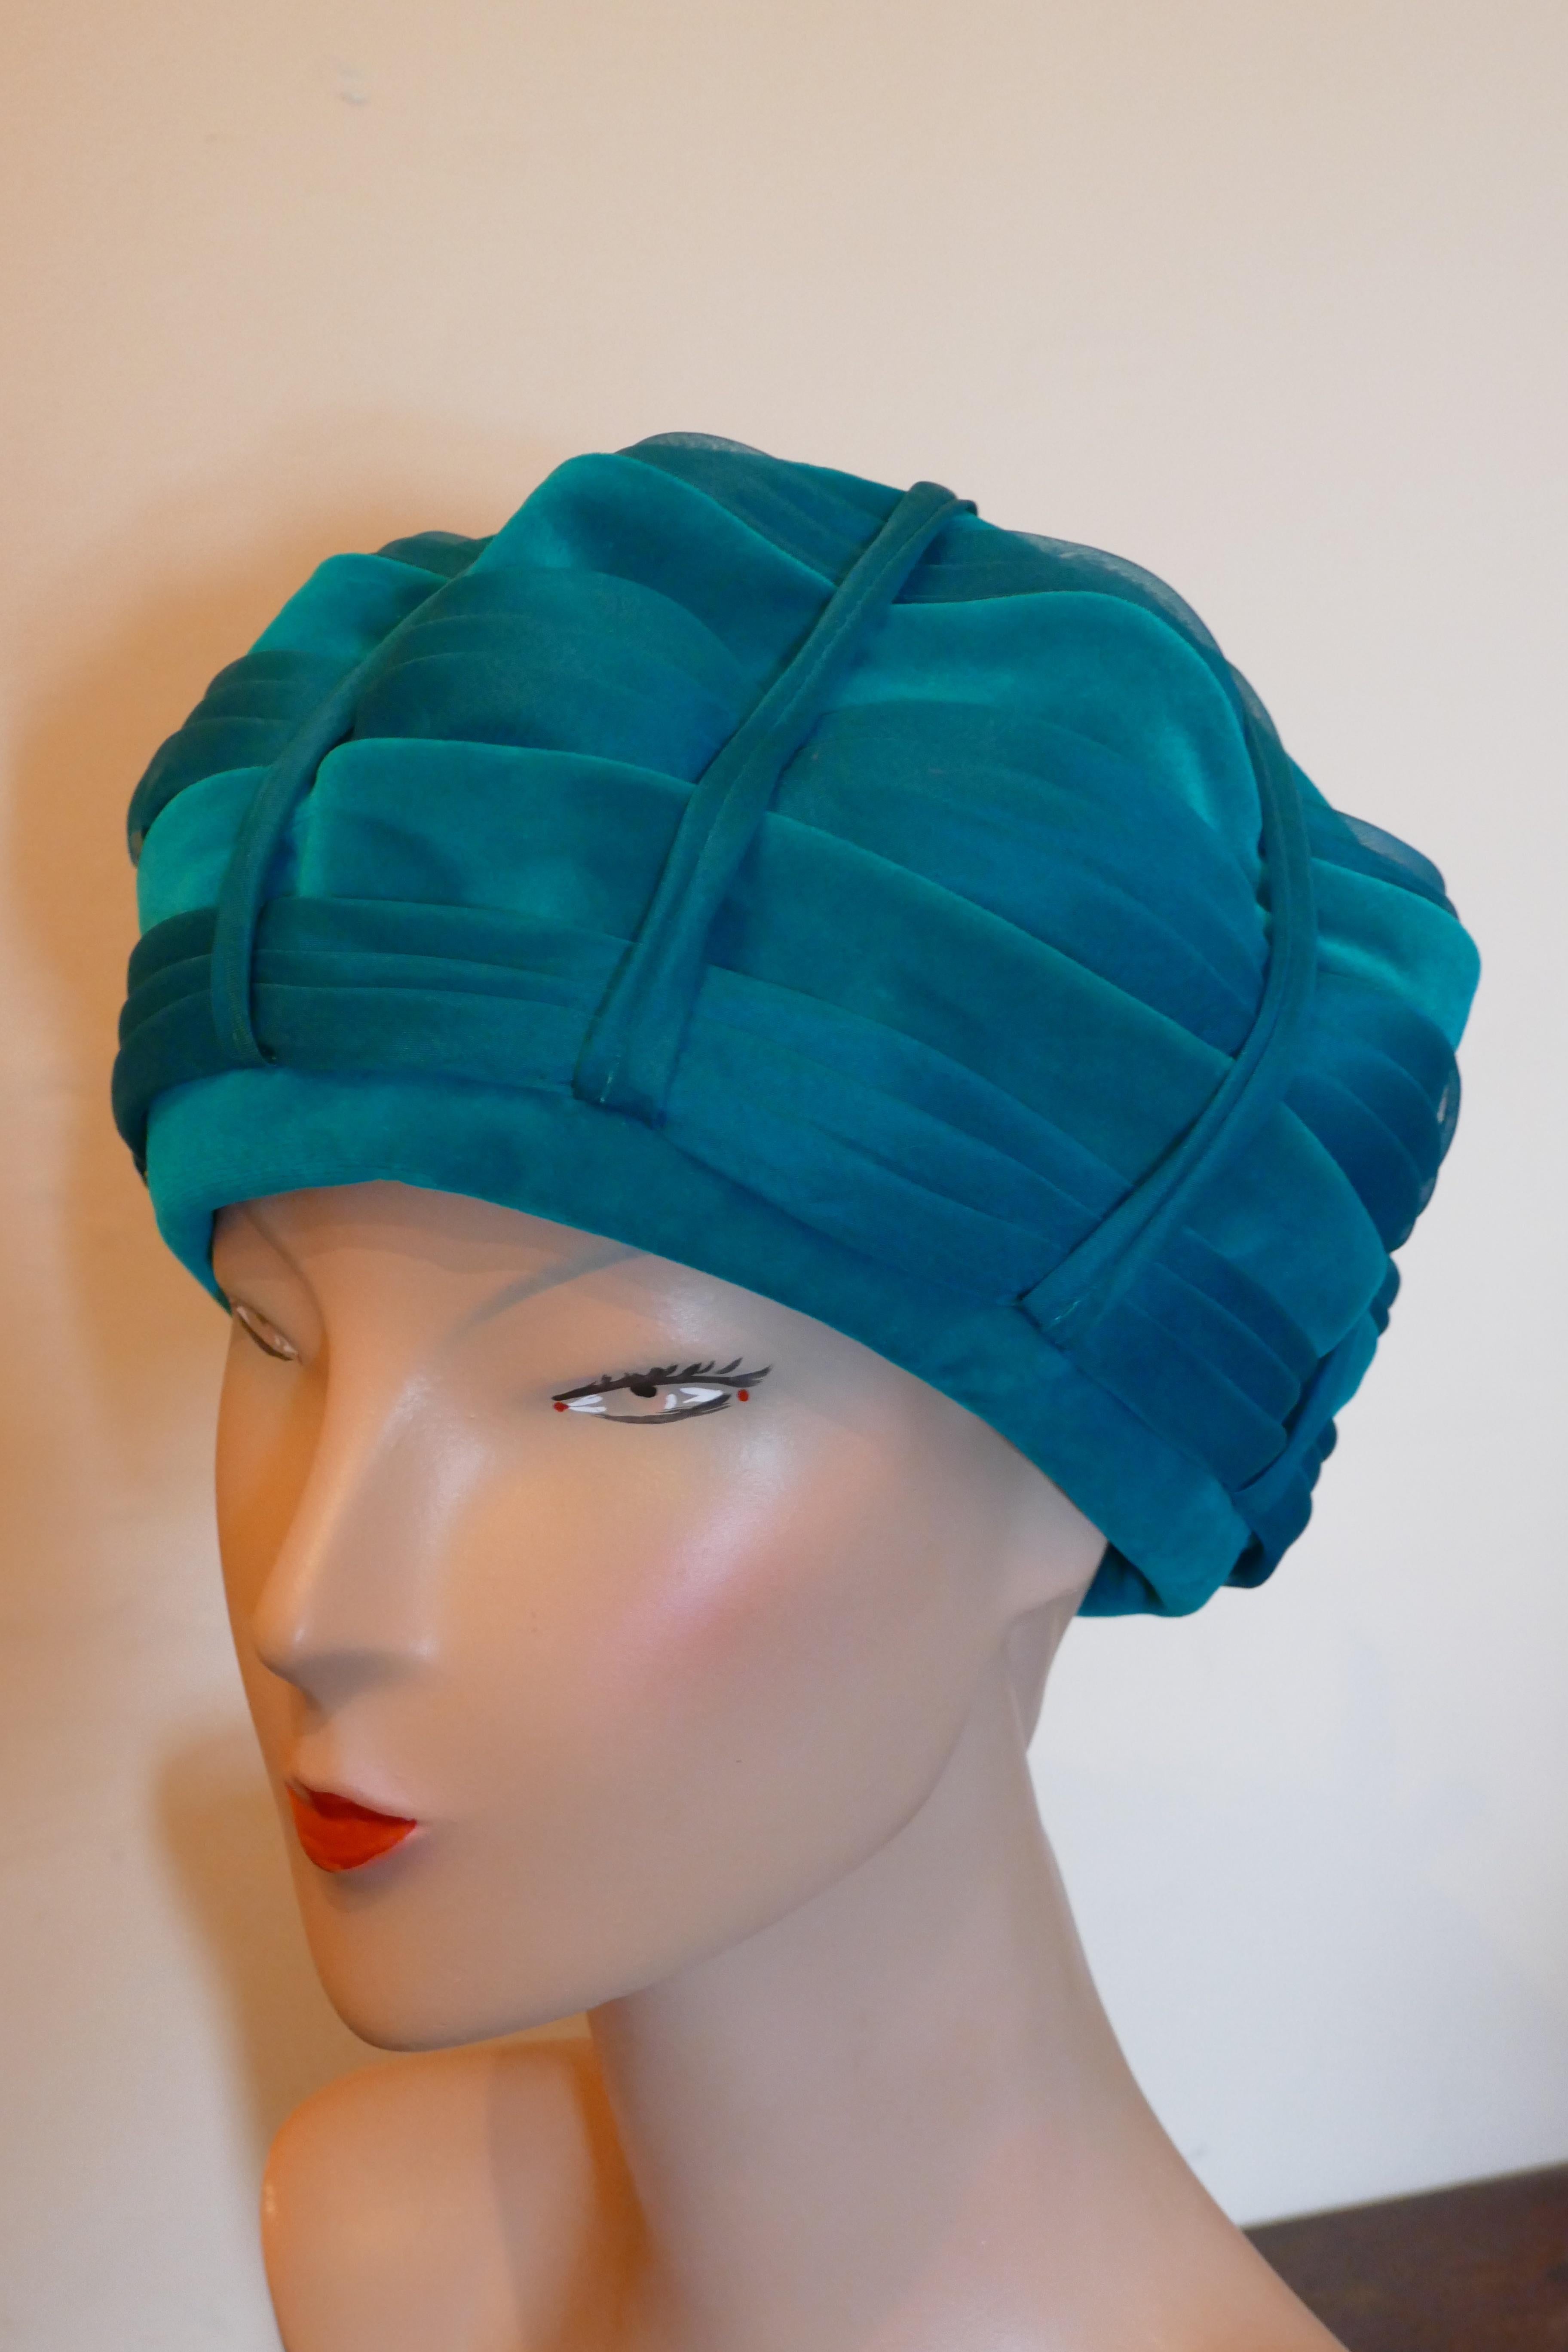 Original 1960s Beret Style Teal Pill Box Hat, Divided Beret

Stunning divided beret style pill box hat, the pleated velvet is divided into sections with chiffon and Satin ribbons,
The beret has a stylish shape and with a gathered ribbon decoration